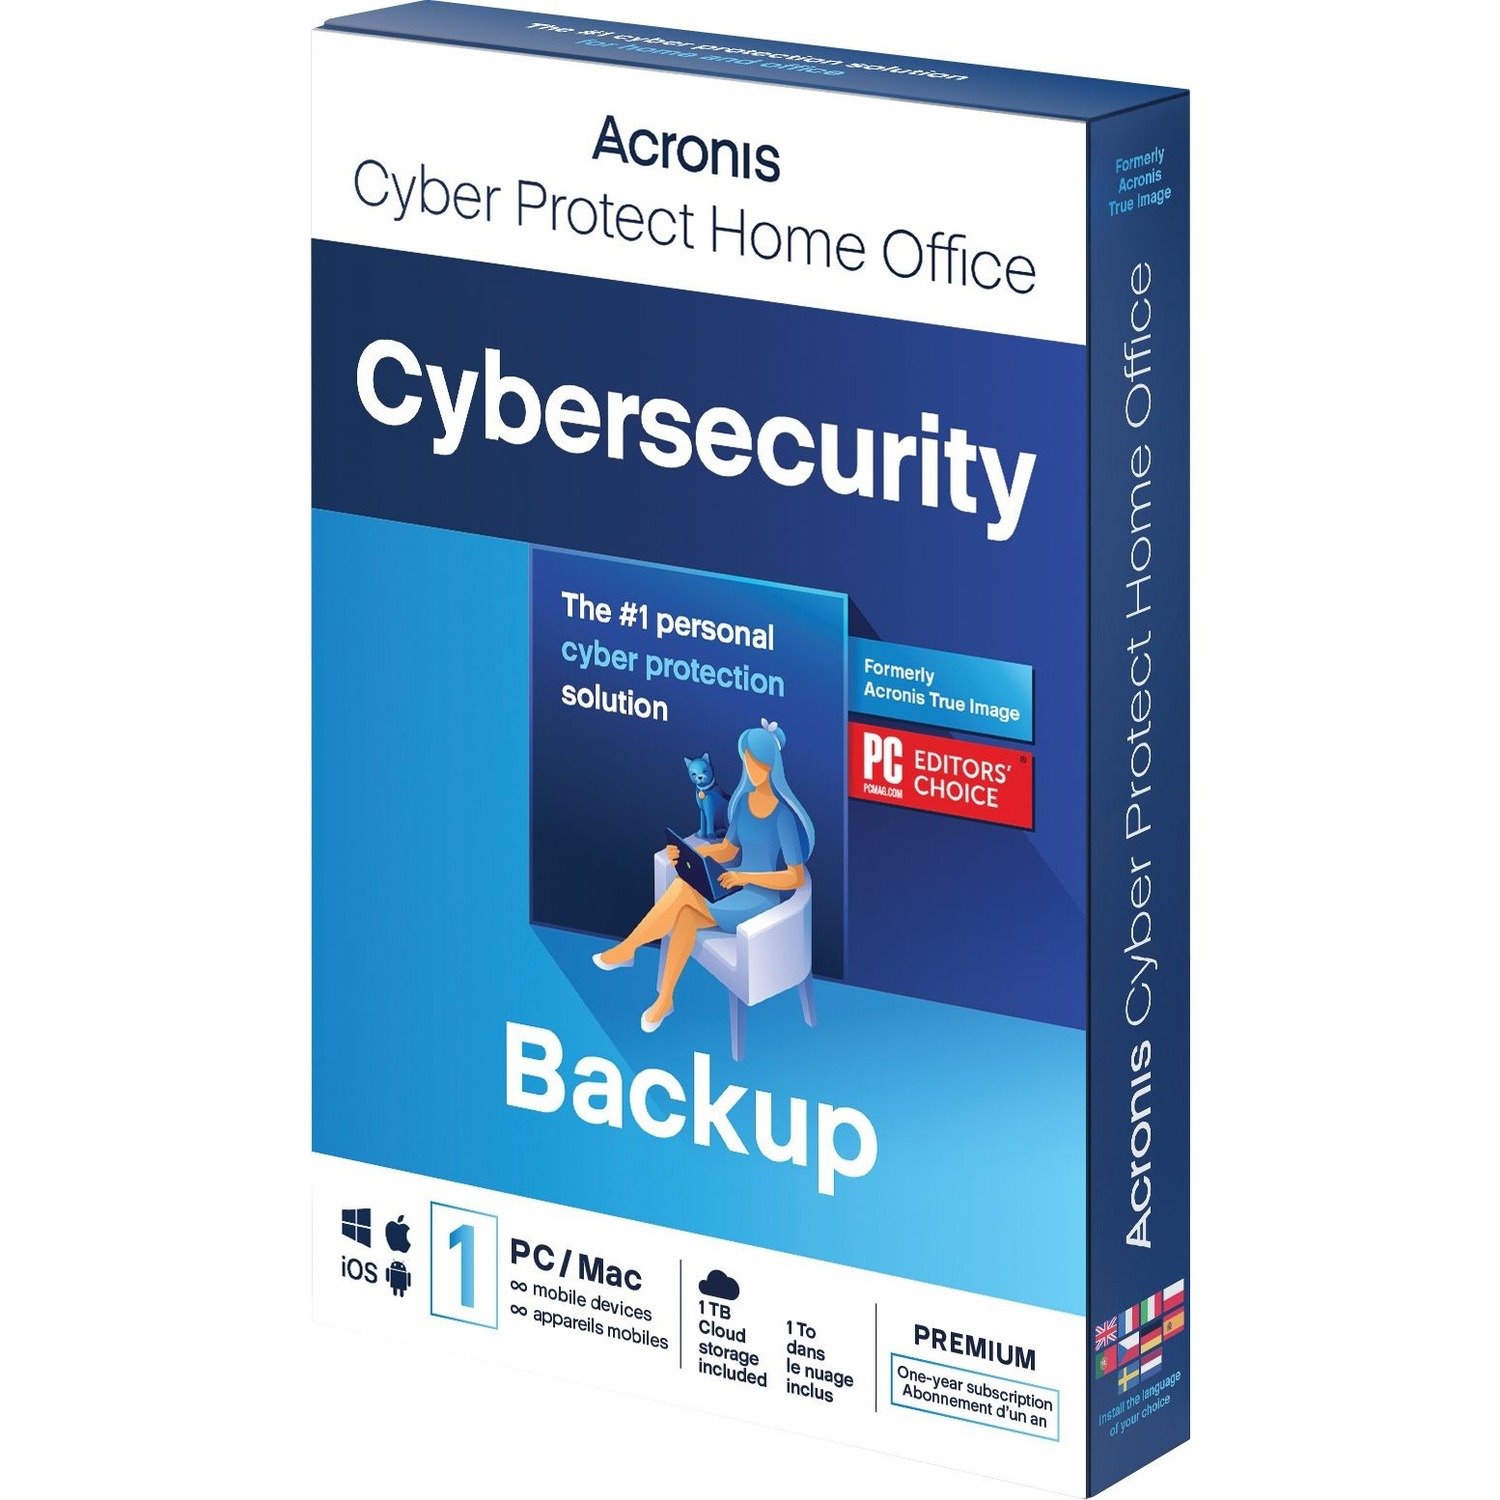 Acronis Cyber Protect Home Office 2022 Premium - Subscription - 1 Computer, 1 TB Acronis Cloud Storage - 1 Year